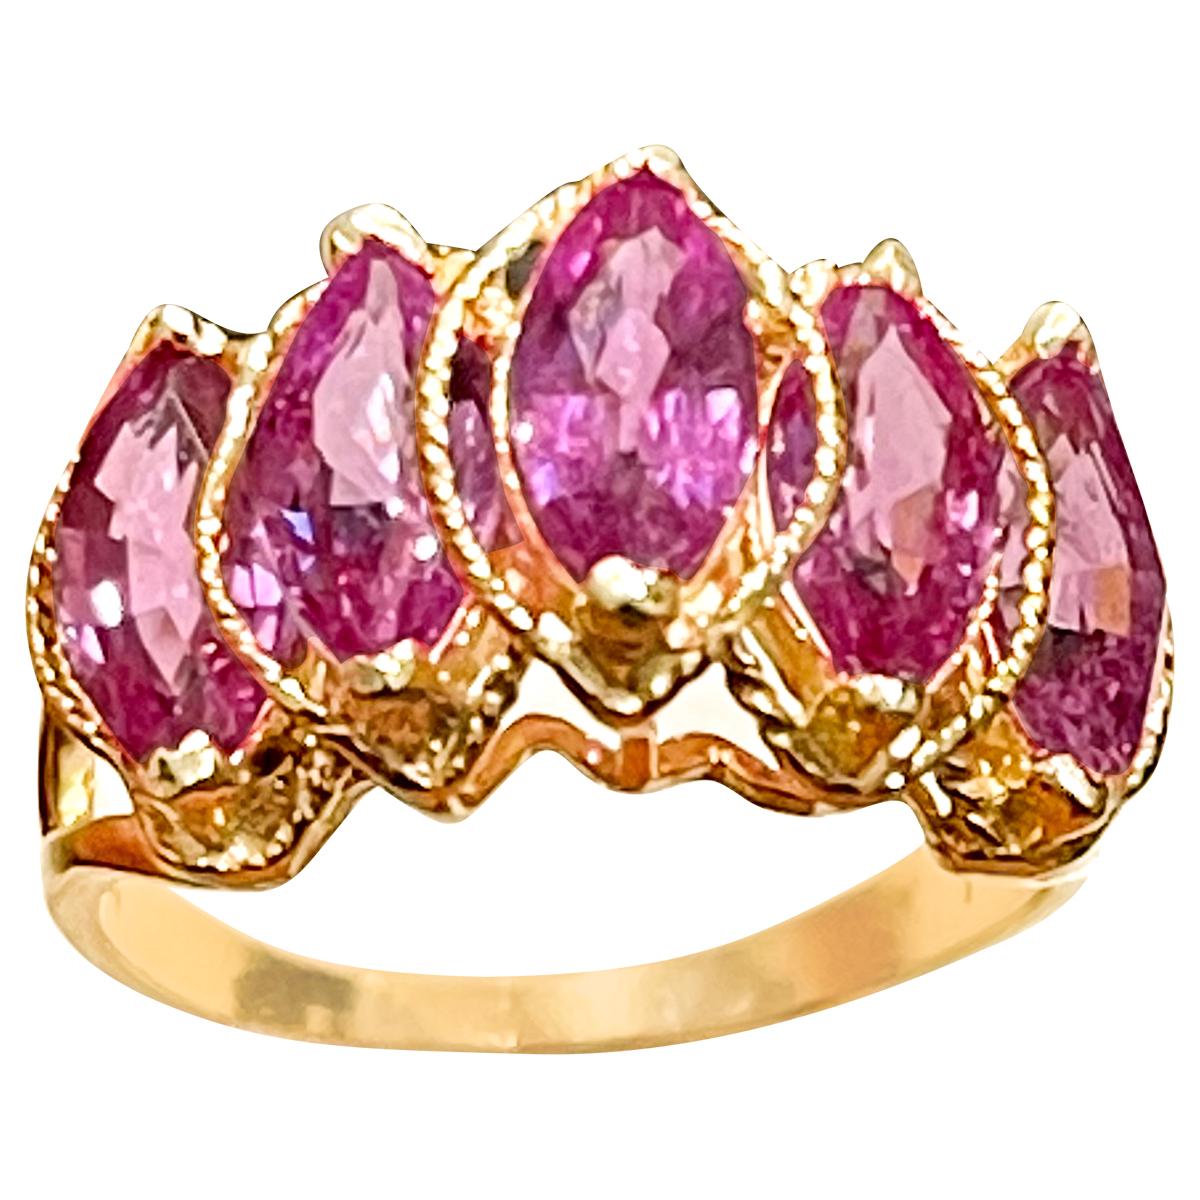 A classic, Band , Very delicate ring !
Approximately 4 Ct  Pink Sapphire &  Diamond 14 Karat Yellow  Gold Band Ring, Estate Size 6
5  natural Marquise shape  Pink sapphire 
14 Karat Yellow  Gold: 3.7  Grams
 Stamped  for 14 K Gold
Ring Size 6  ( can